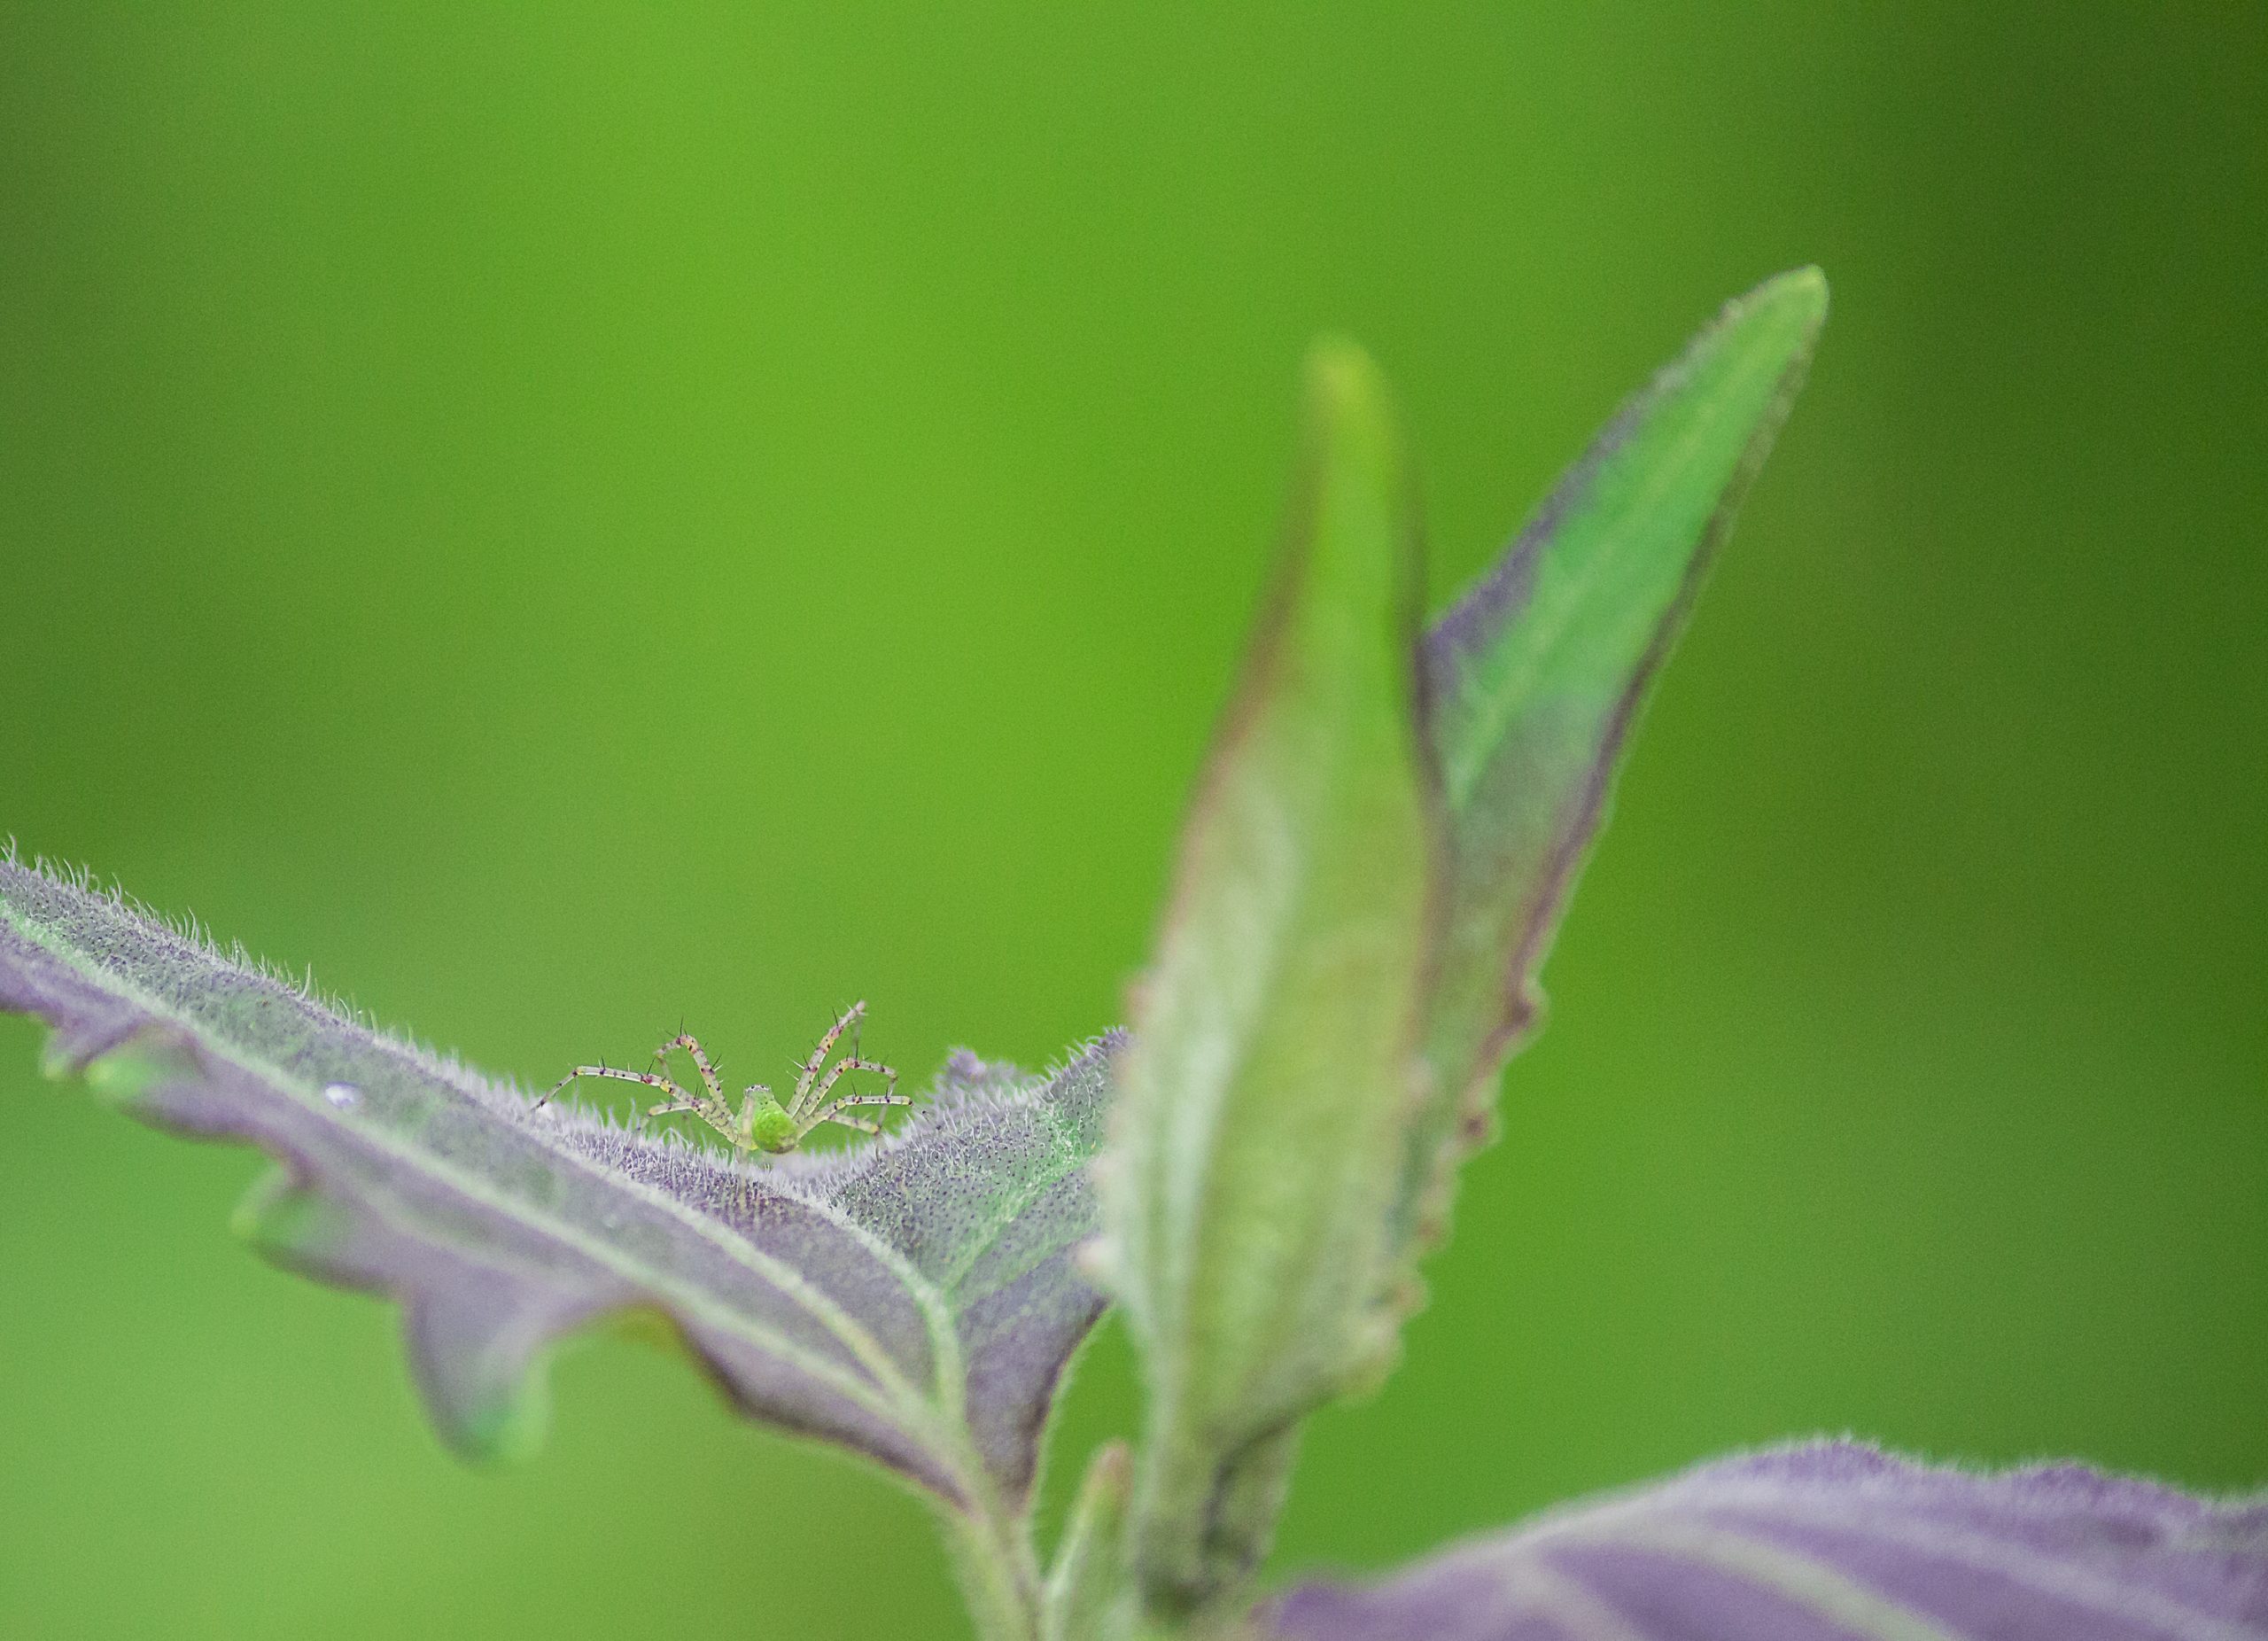 A spider on a plant leaf